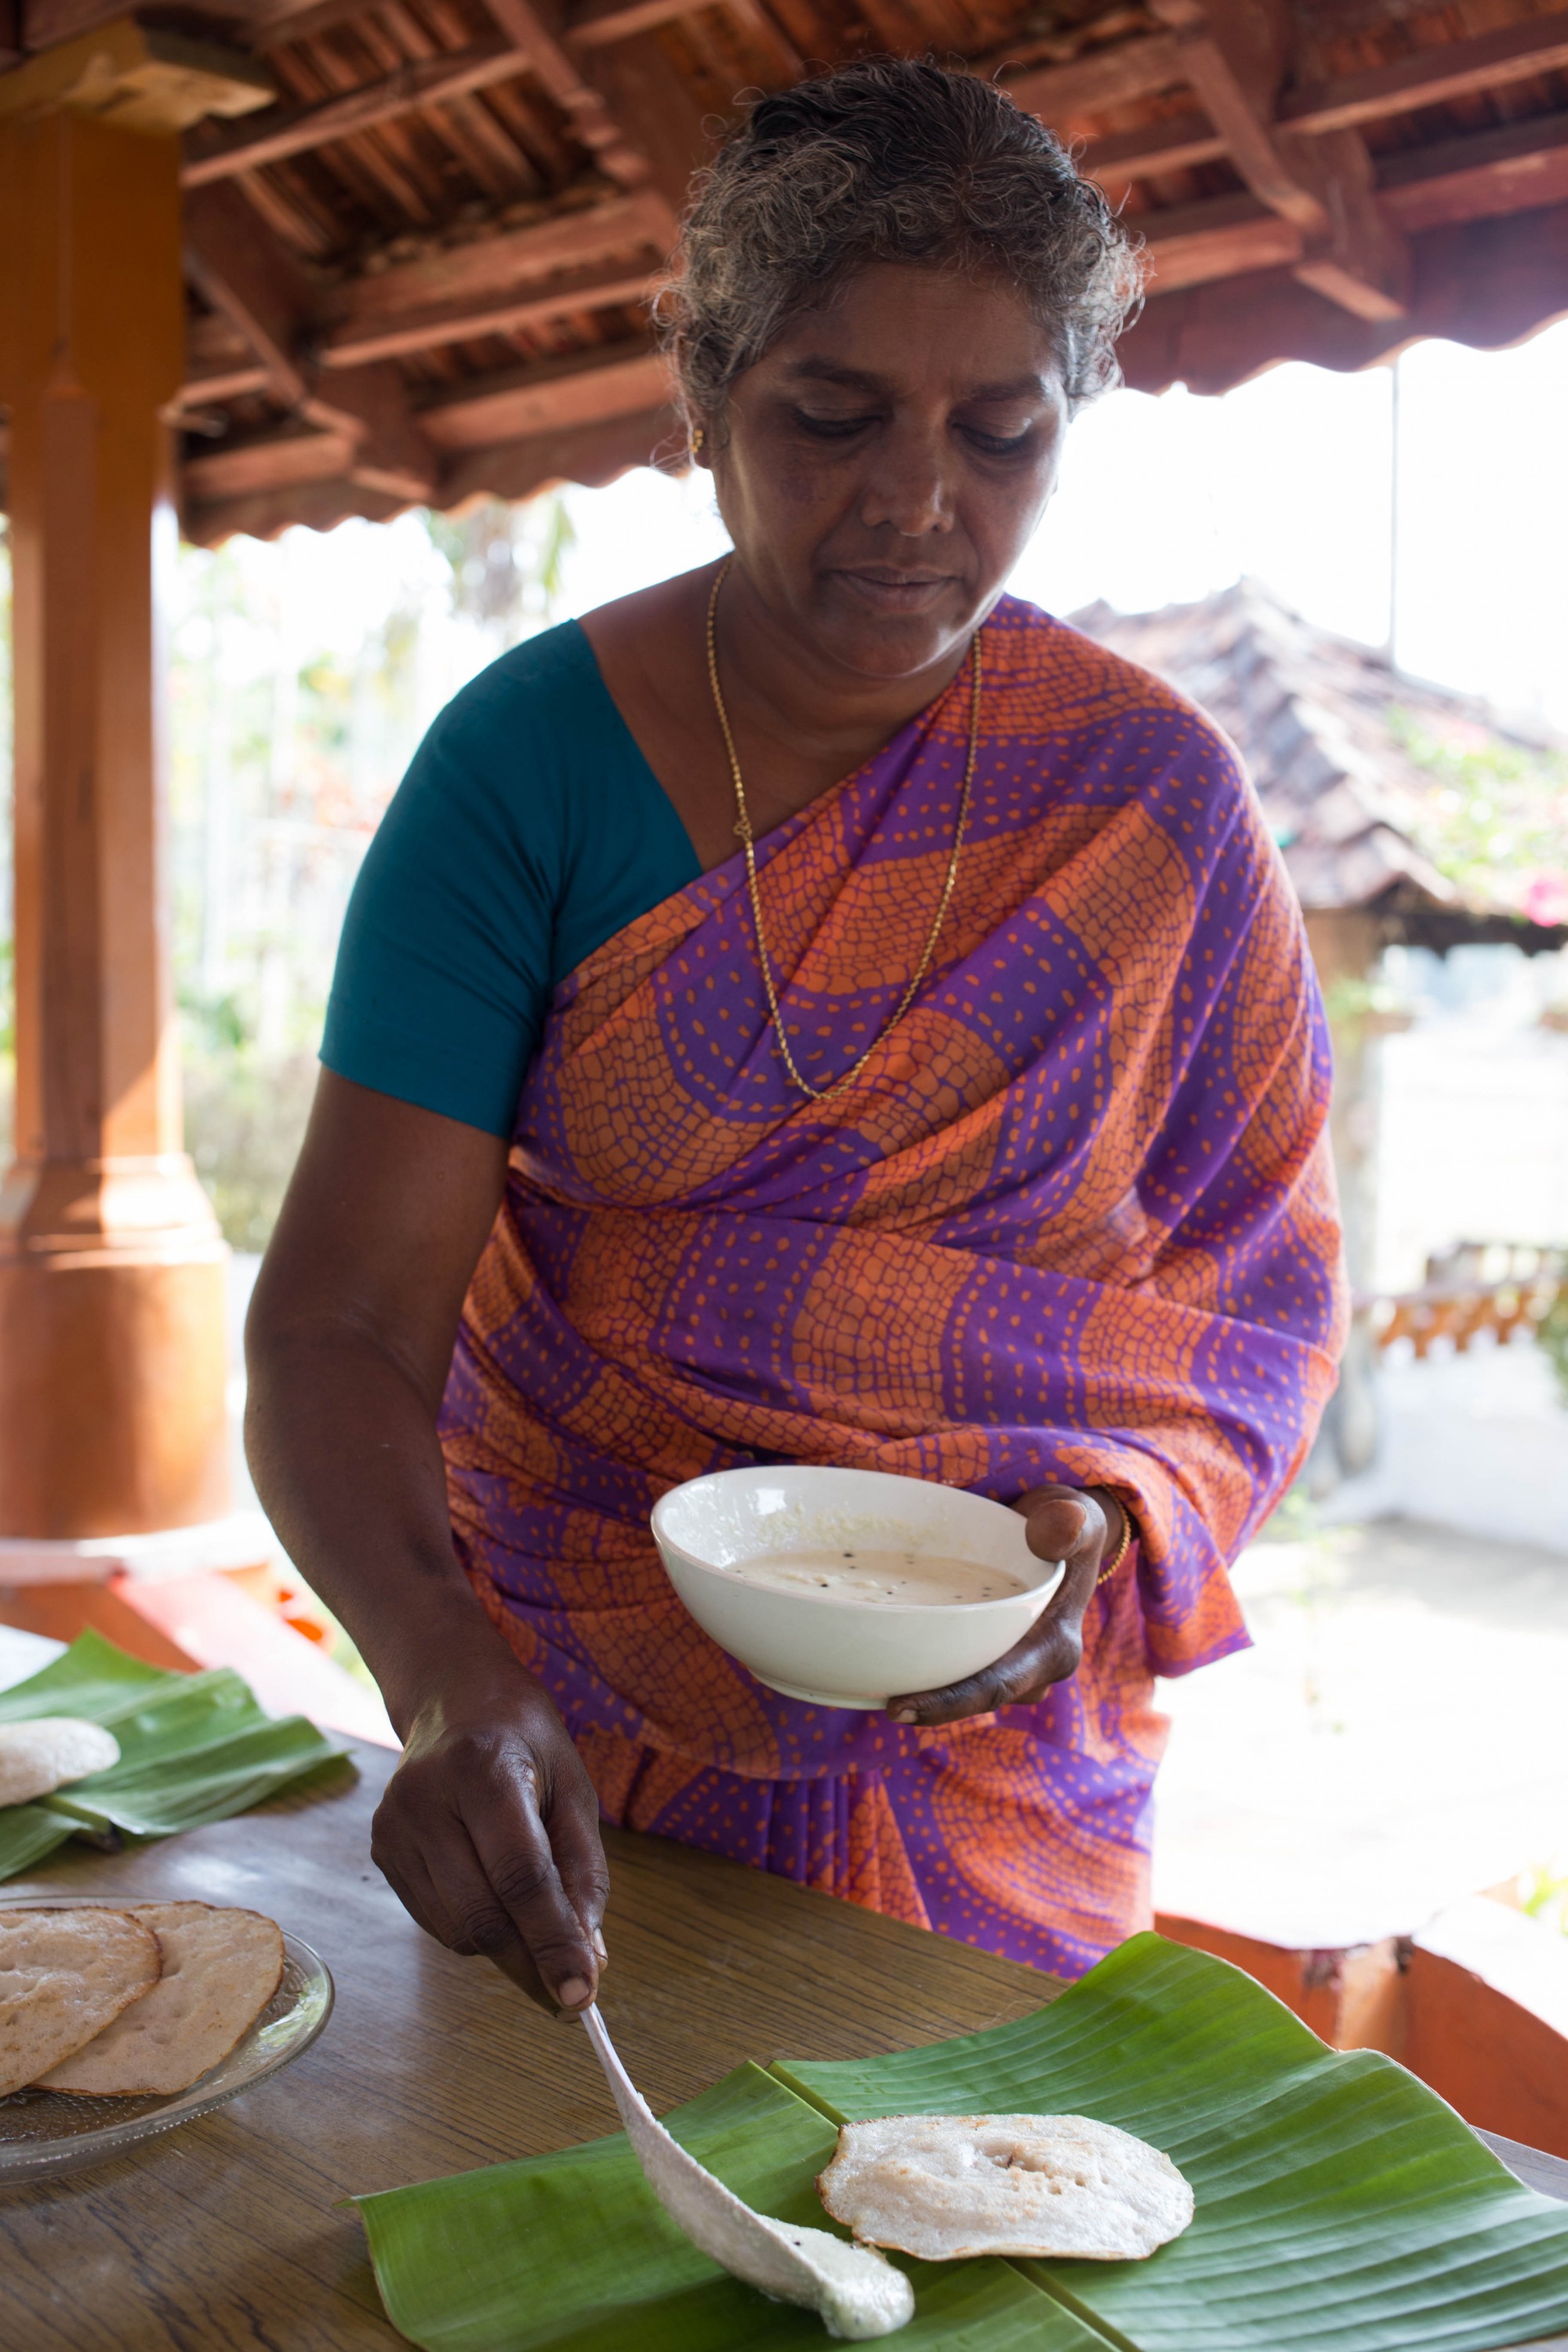 Sumathi and her daughter-in-law, Sowmya, prepare a scrumptious and healthy breakfast.